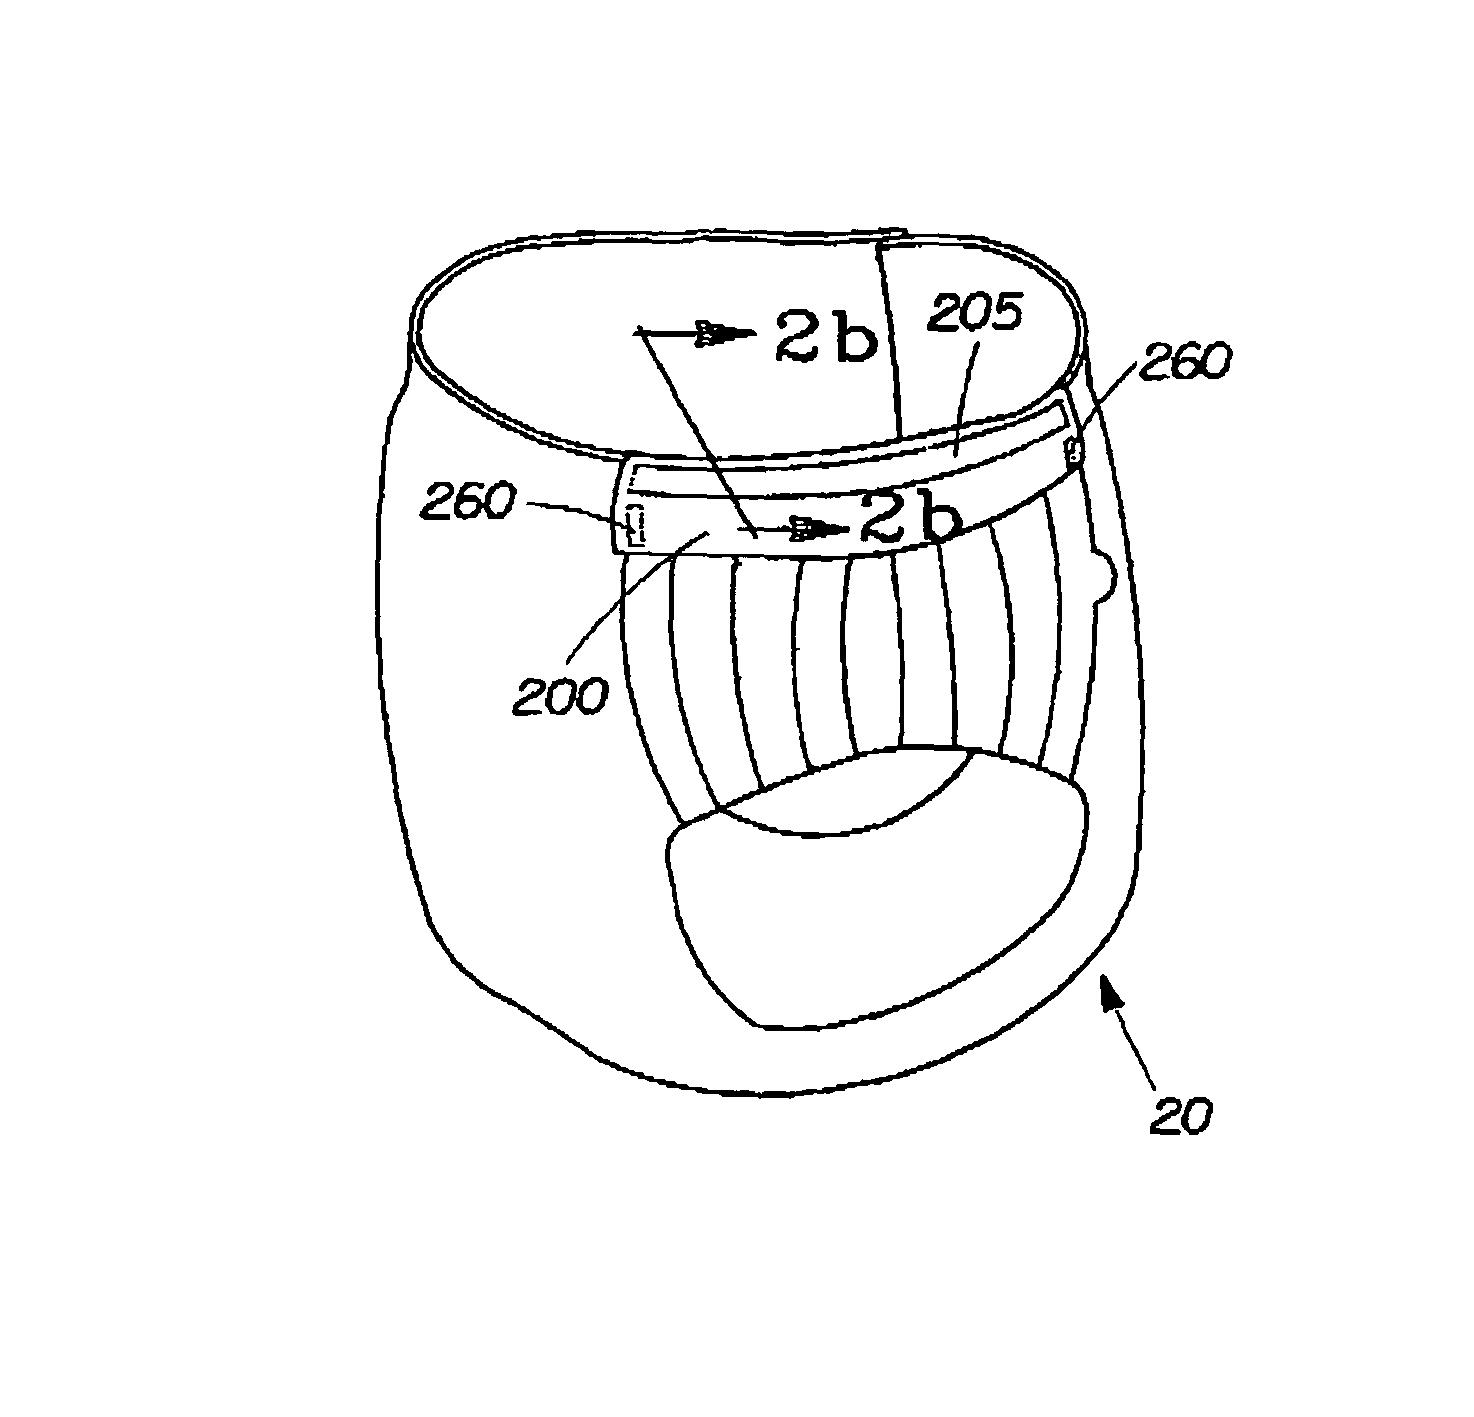 Absorbent article comprising a flap handle that aids in the application of said absorbent article